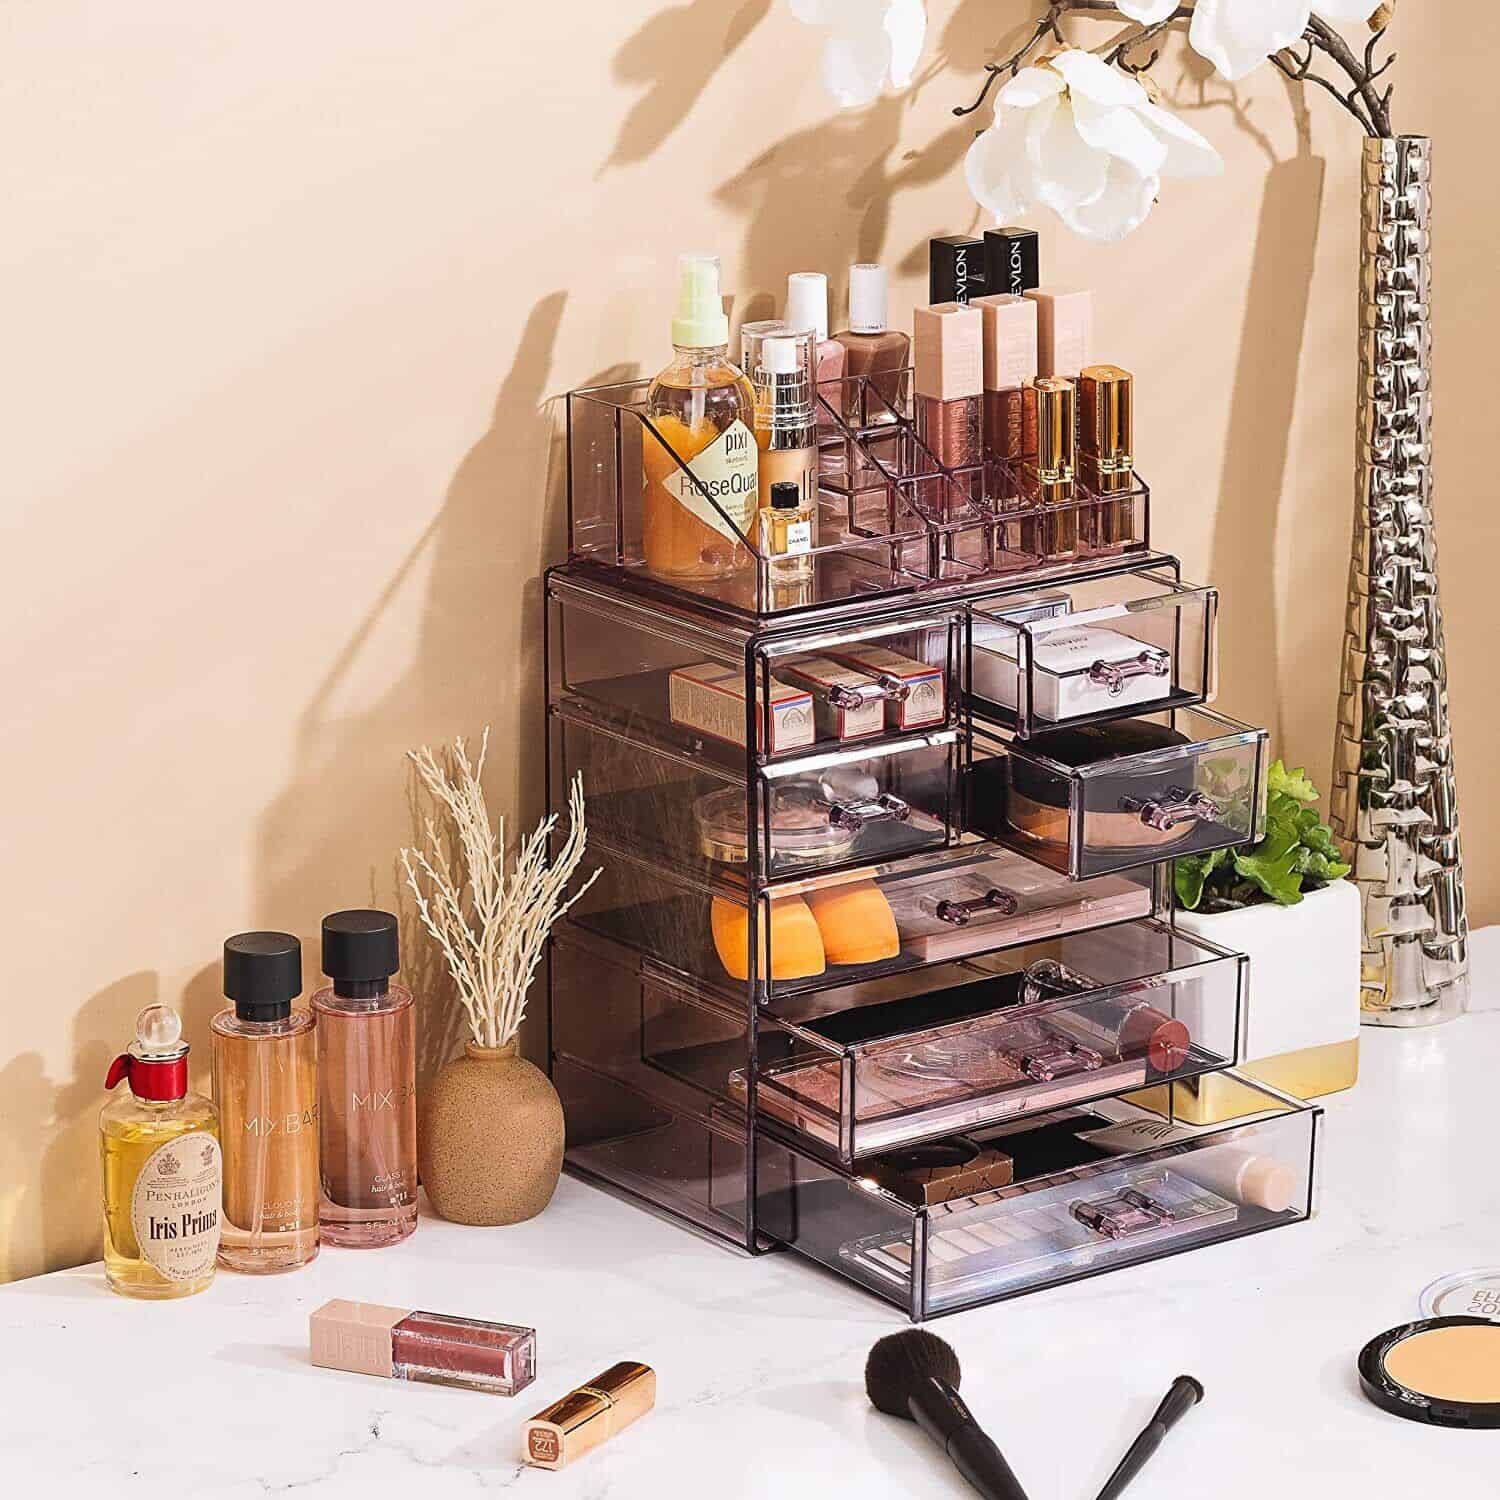 A makeup organizer with cosmetics and brushes on a counter.